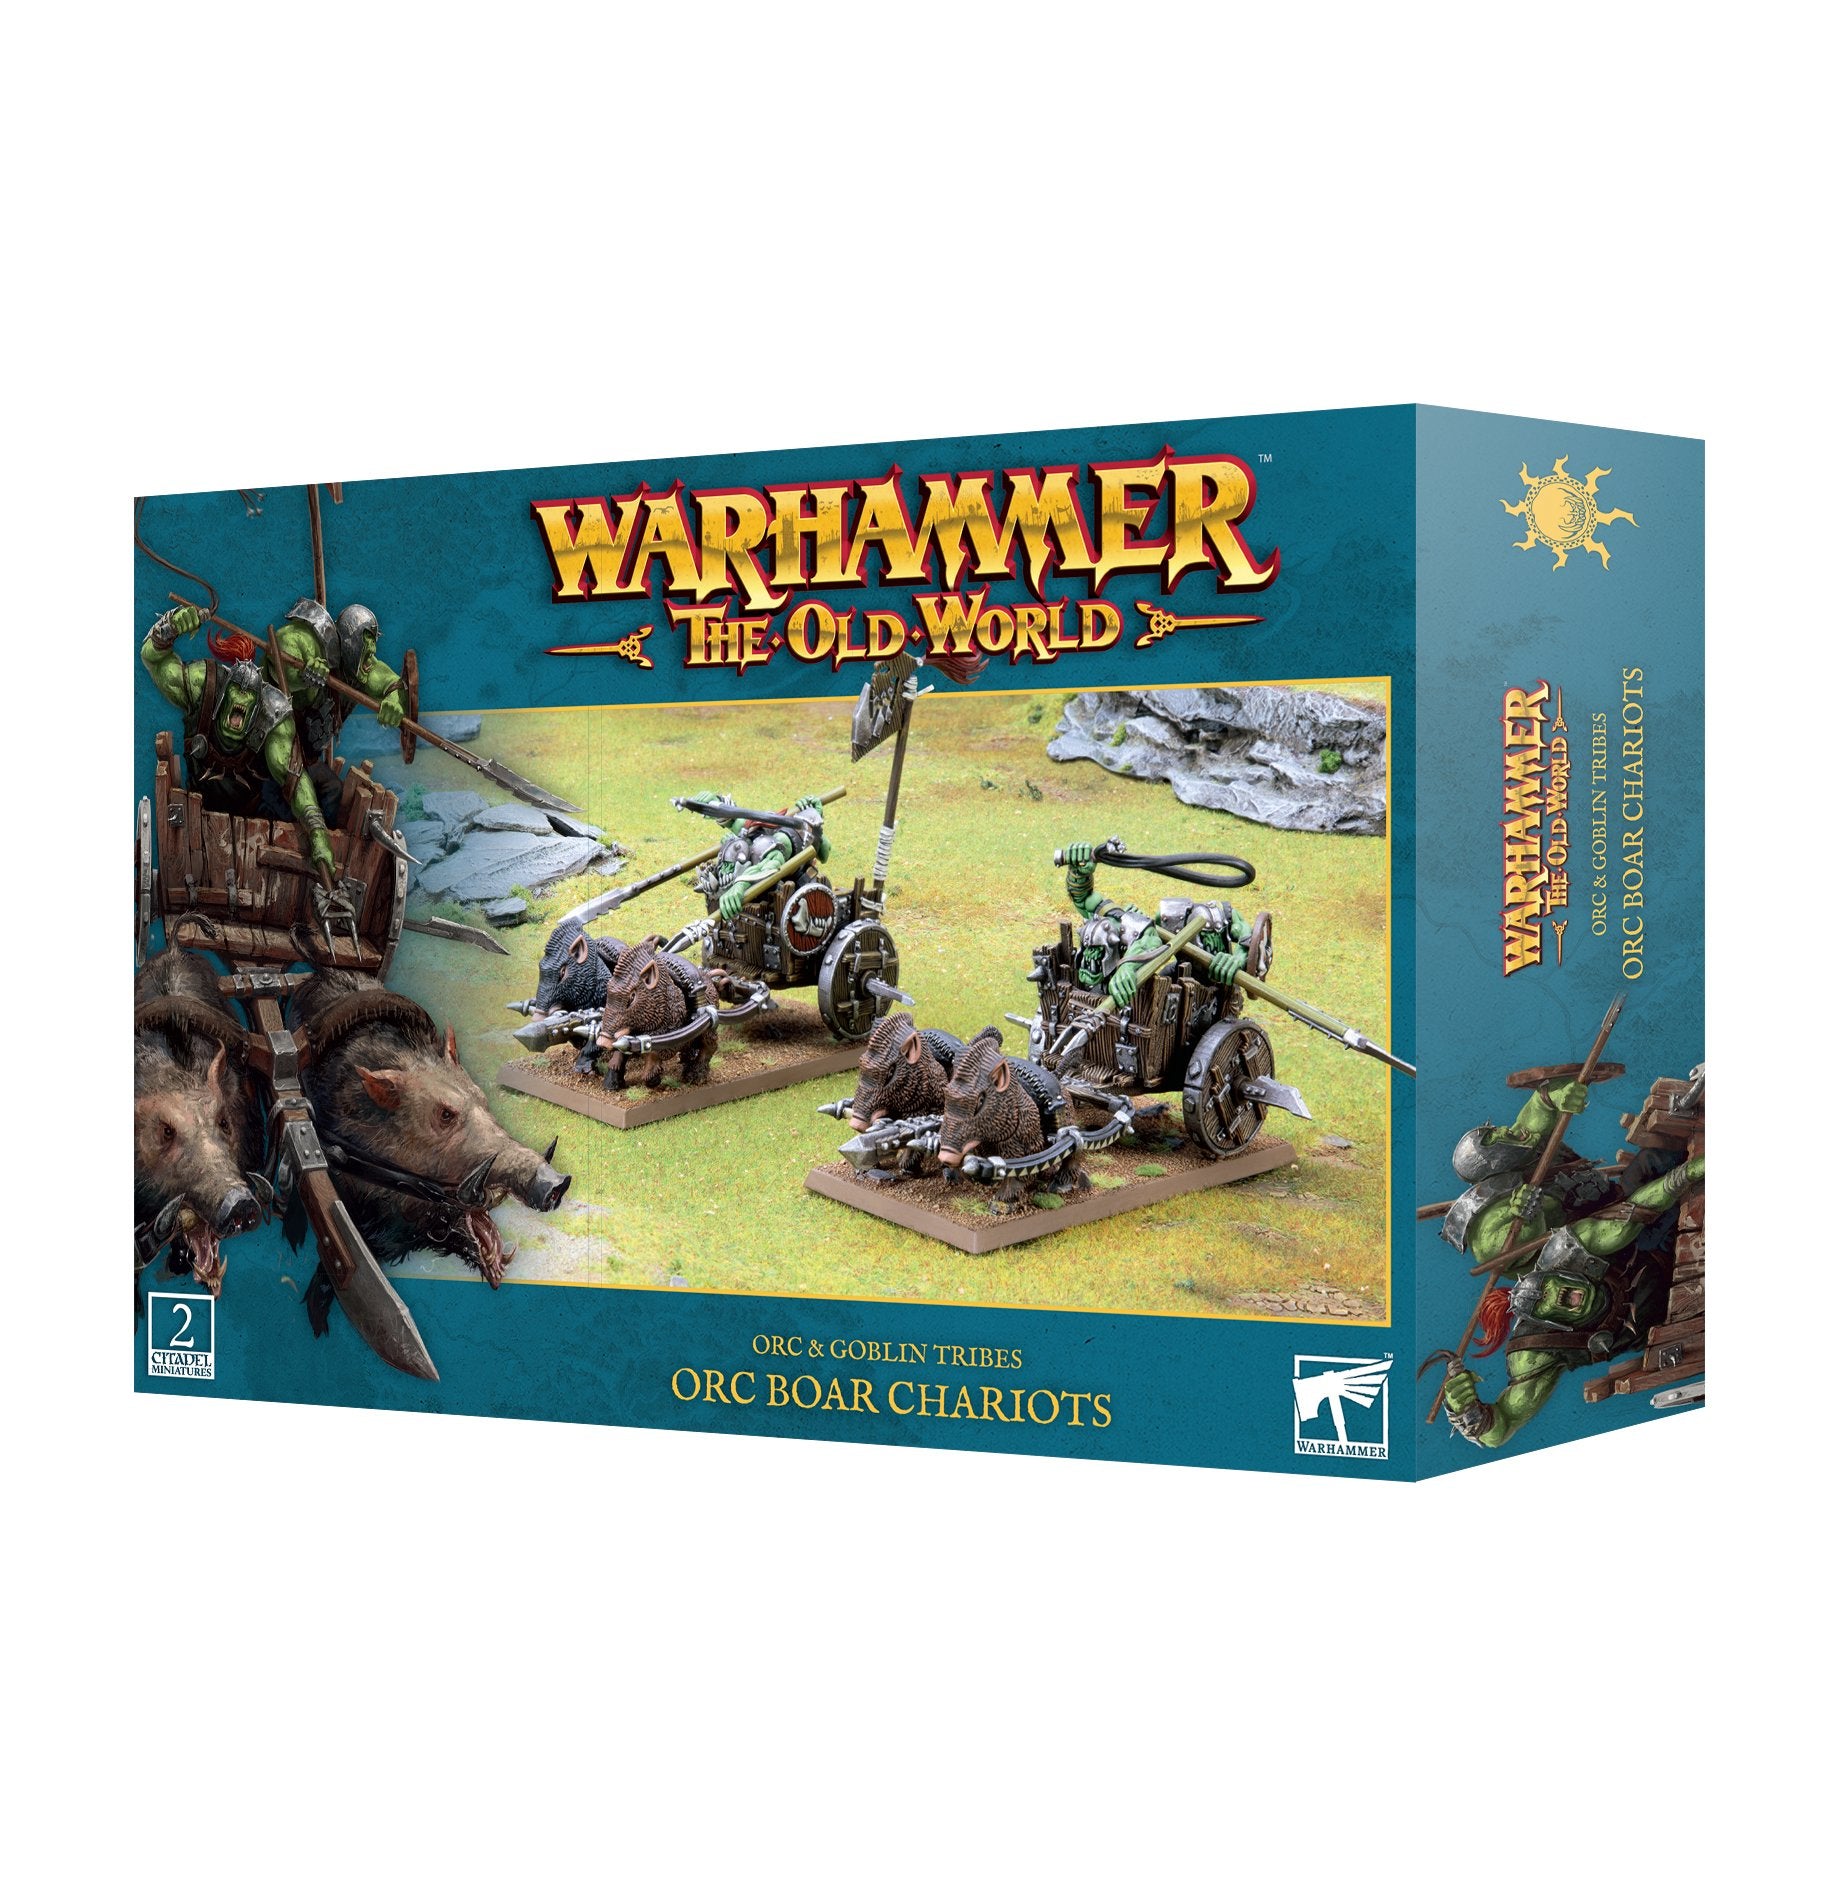 Orc & Goblin Tribes: Orc Boar Chariots - Warhammer The Old World